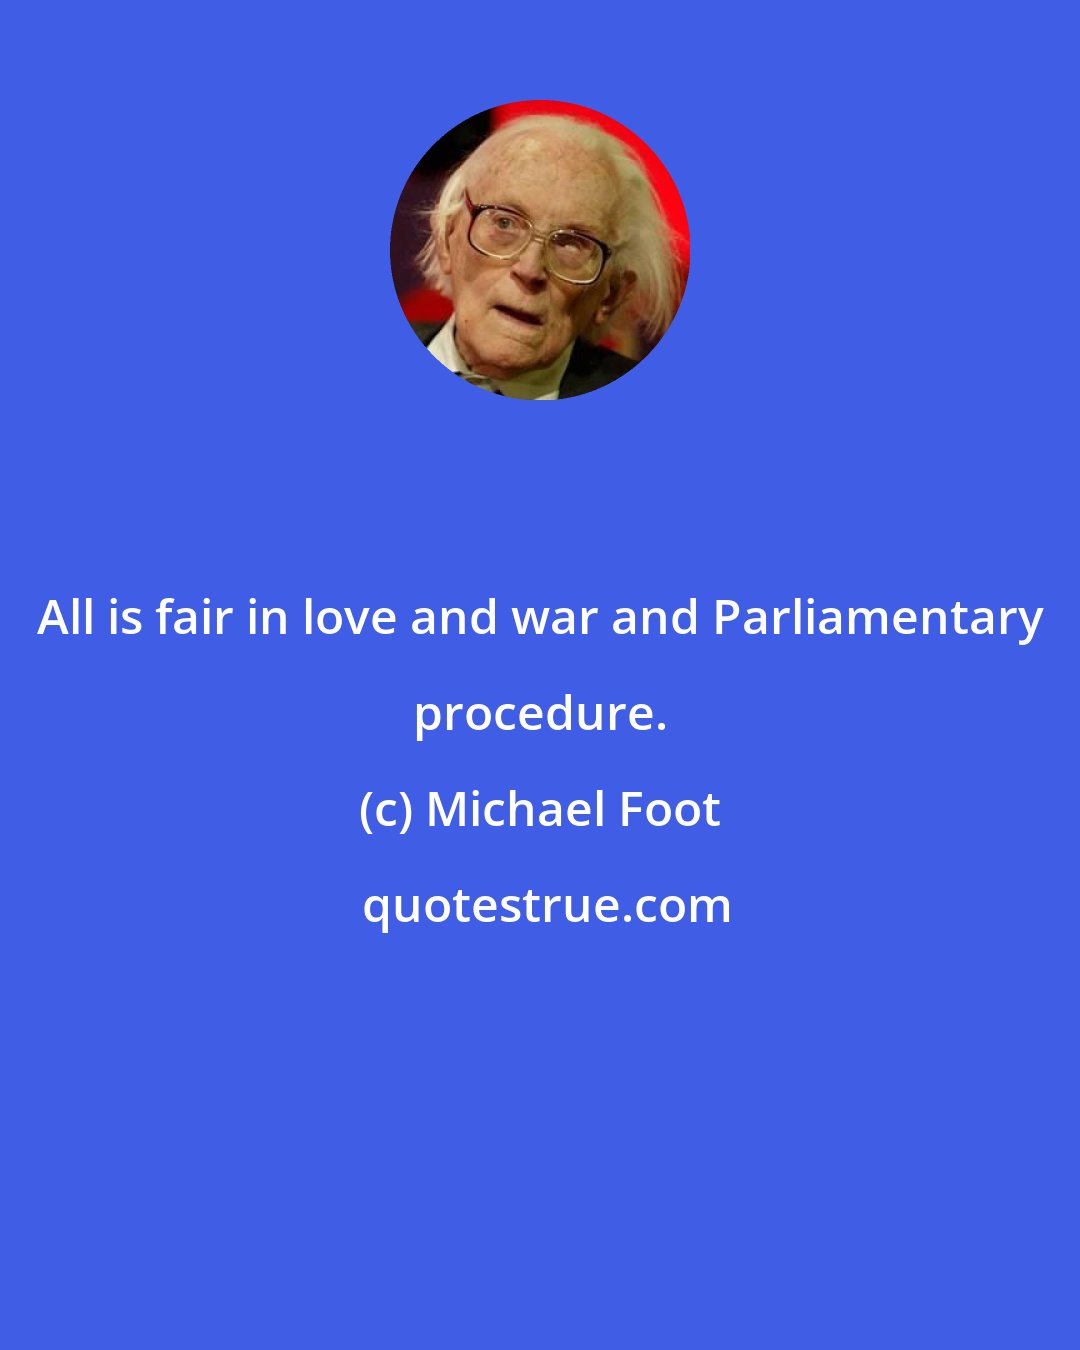 Michael Foot: All is fair in love and war and Parliamentary procedure.